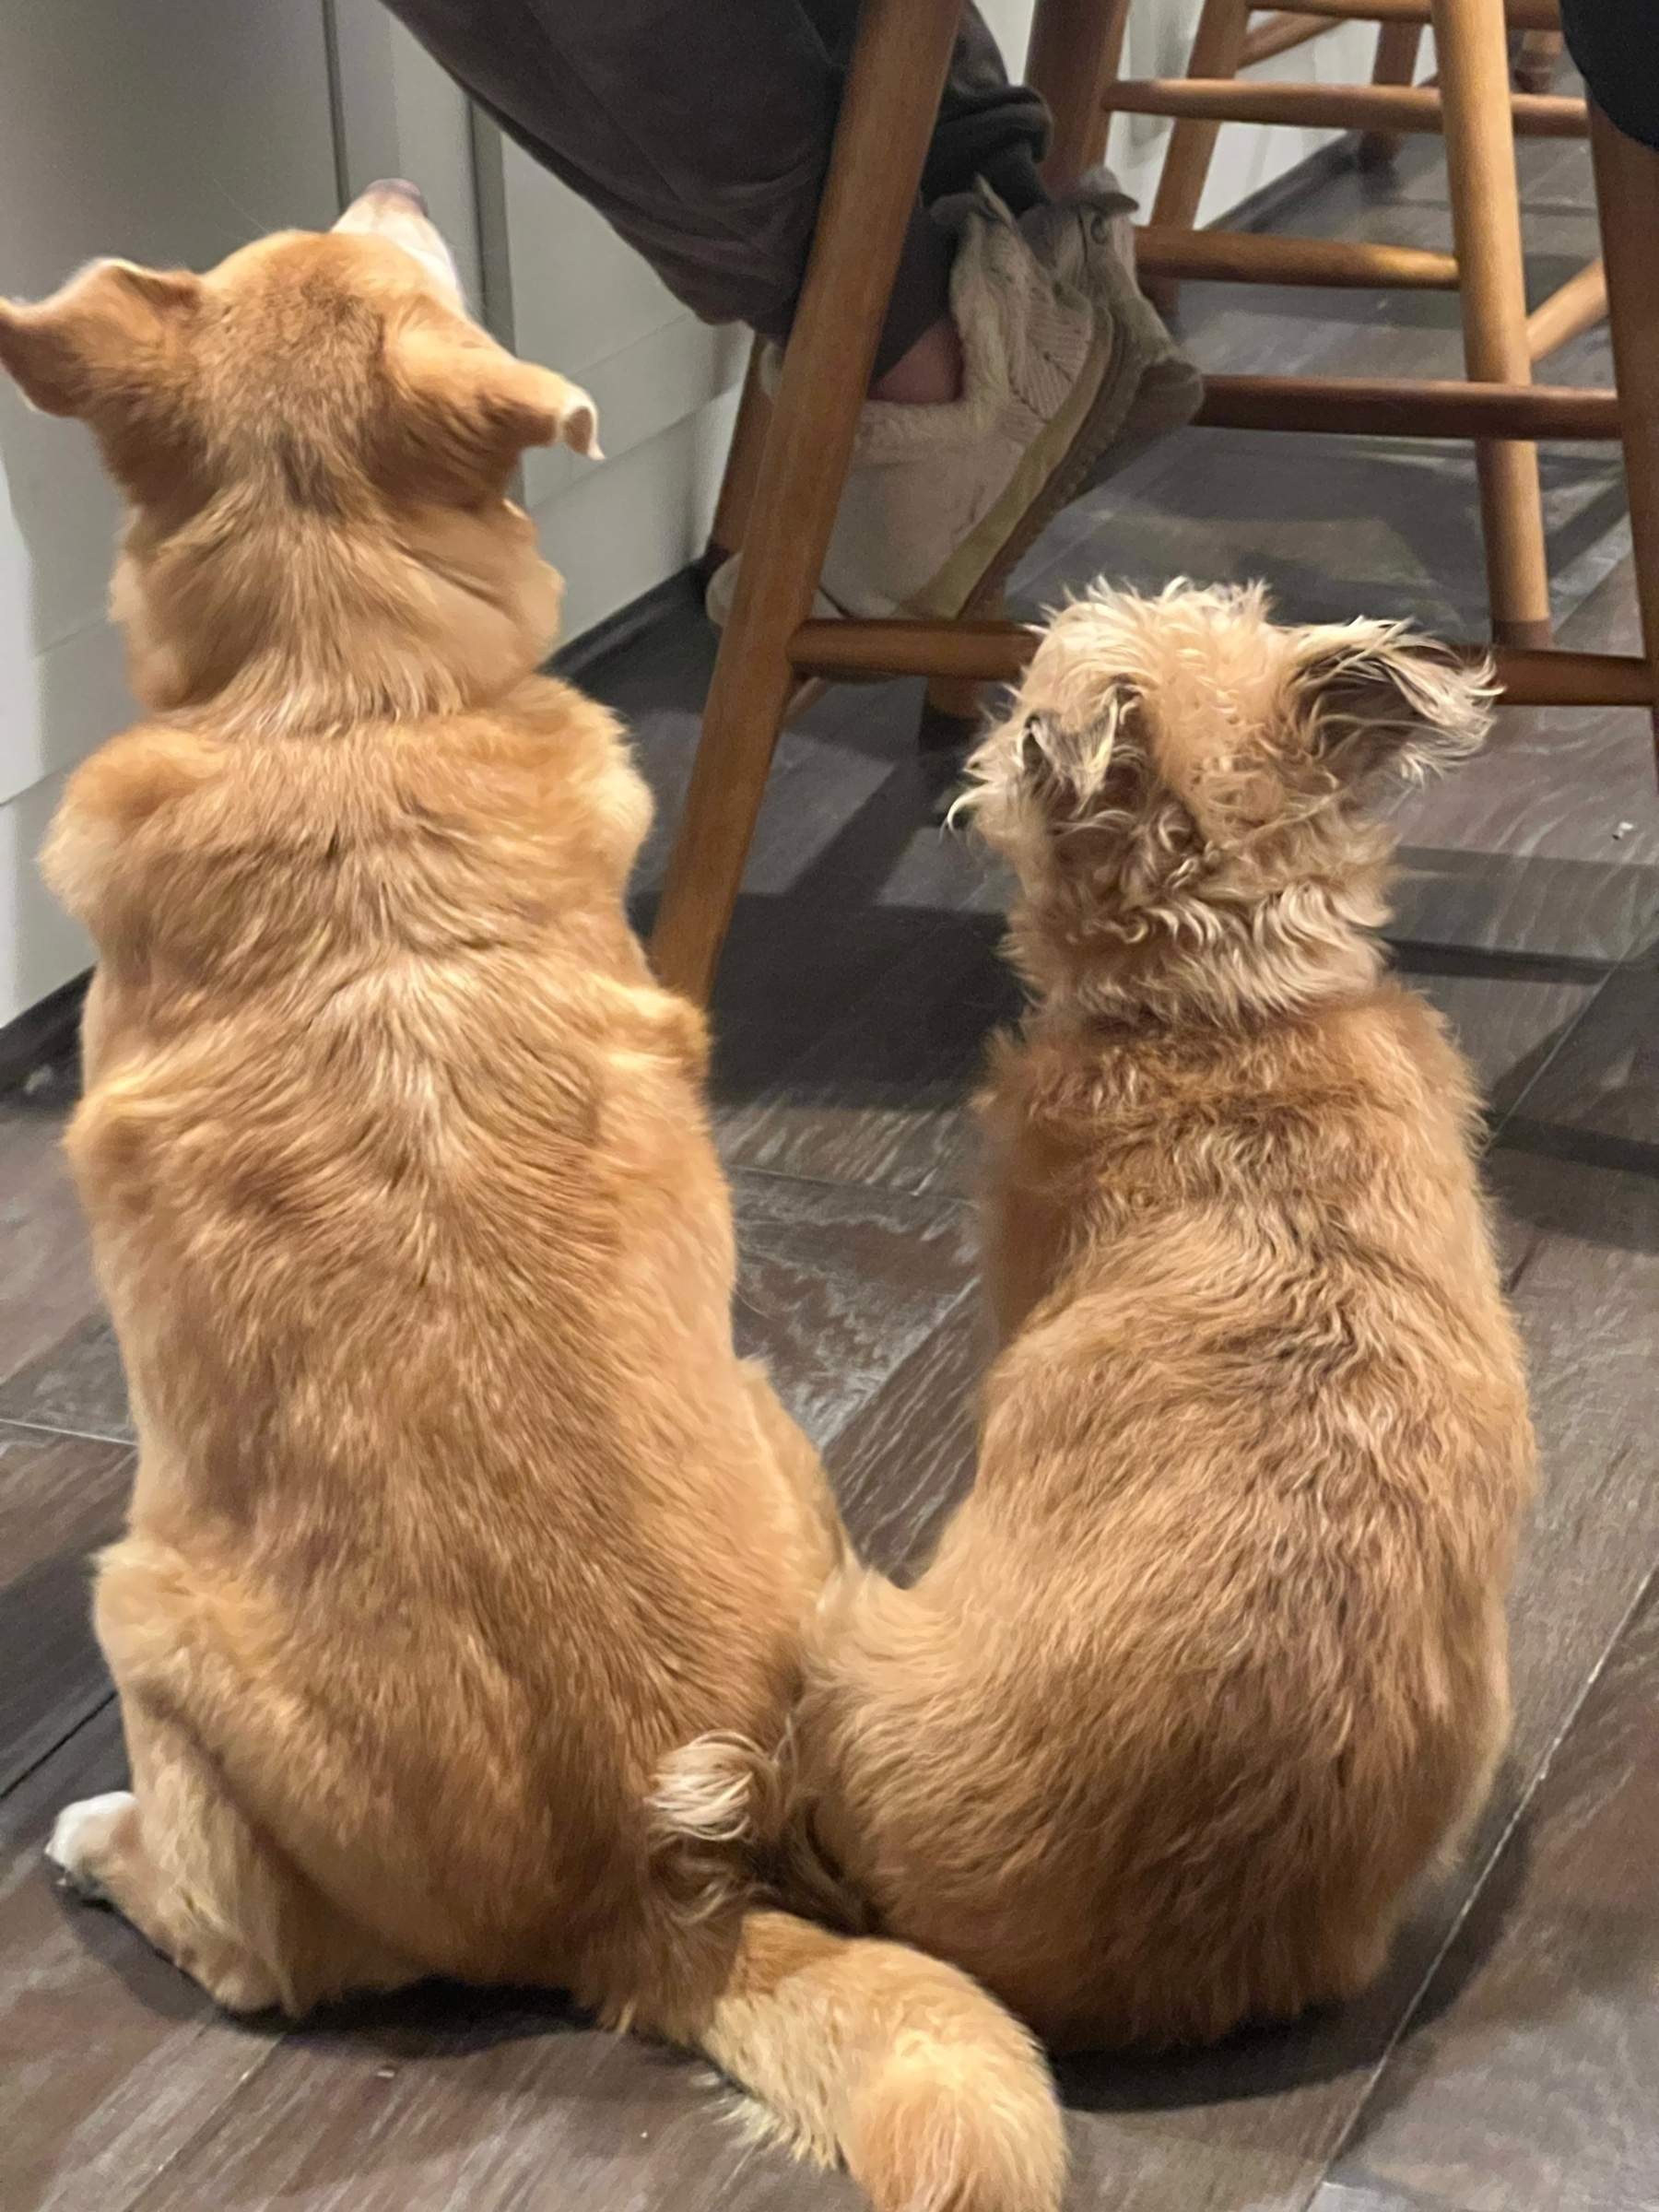 Two dogs, sitting side by side, looking up for food. Shot from behind.